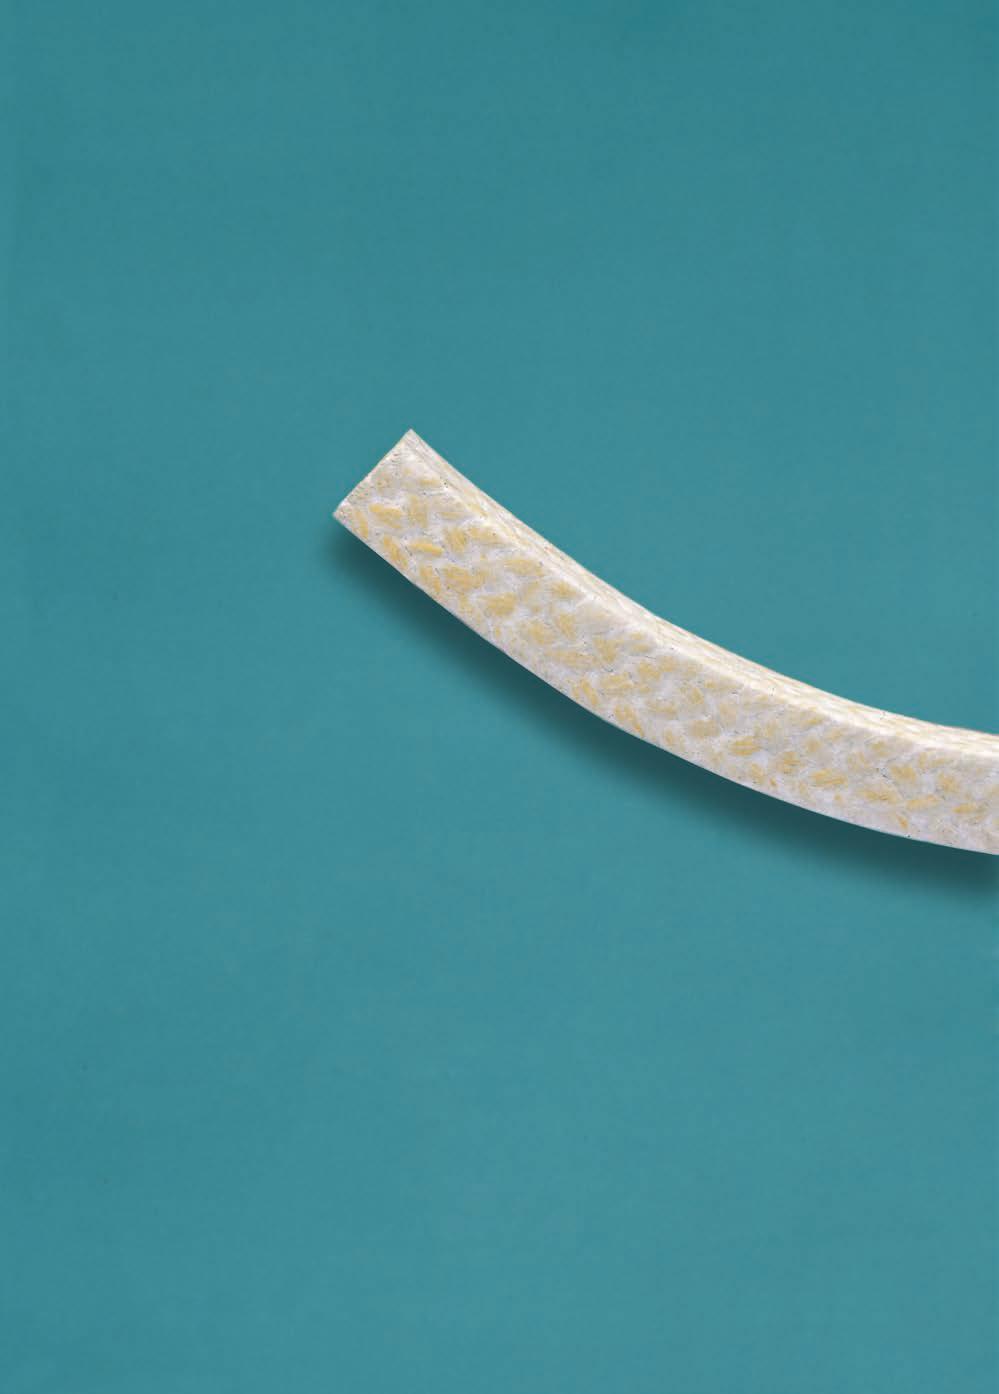 SX9053 PACKINGS SX9059 PACKINGS SX9053 SX9059 SX9053 pulp and paper SX9059 ramie fibre + lubricated PTFE Braid packing consisting of synthetic, discontinuous yarn (polyimide) lubricated in three